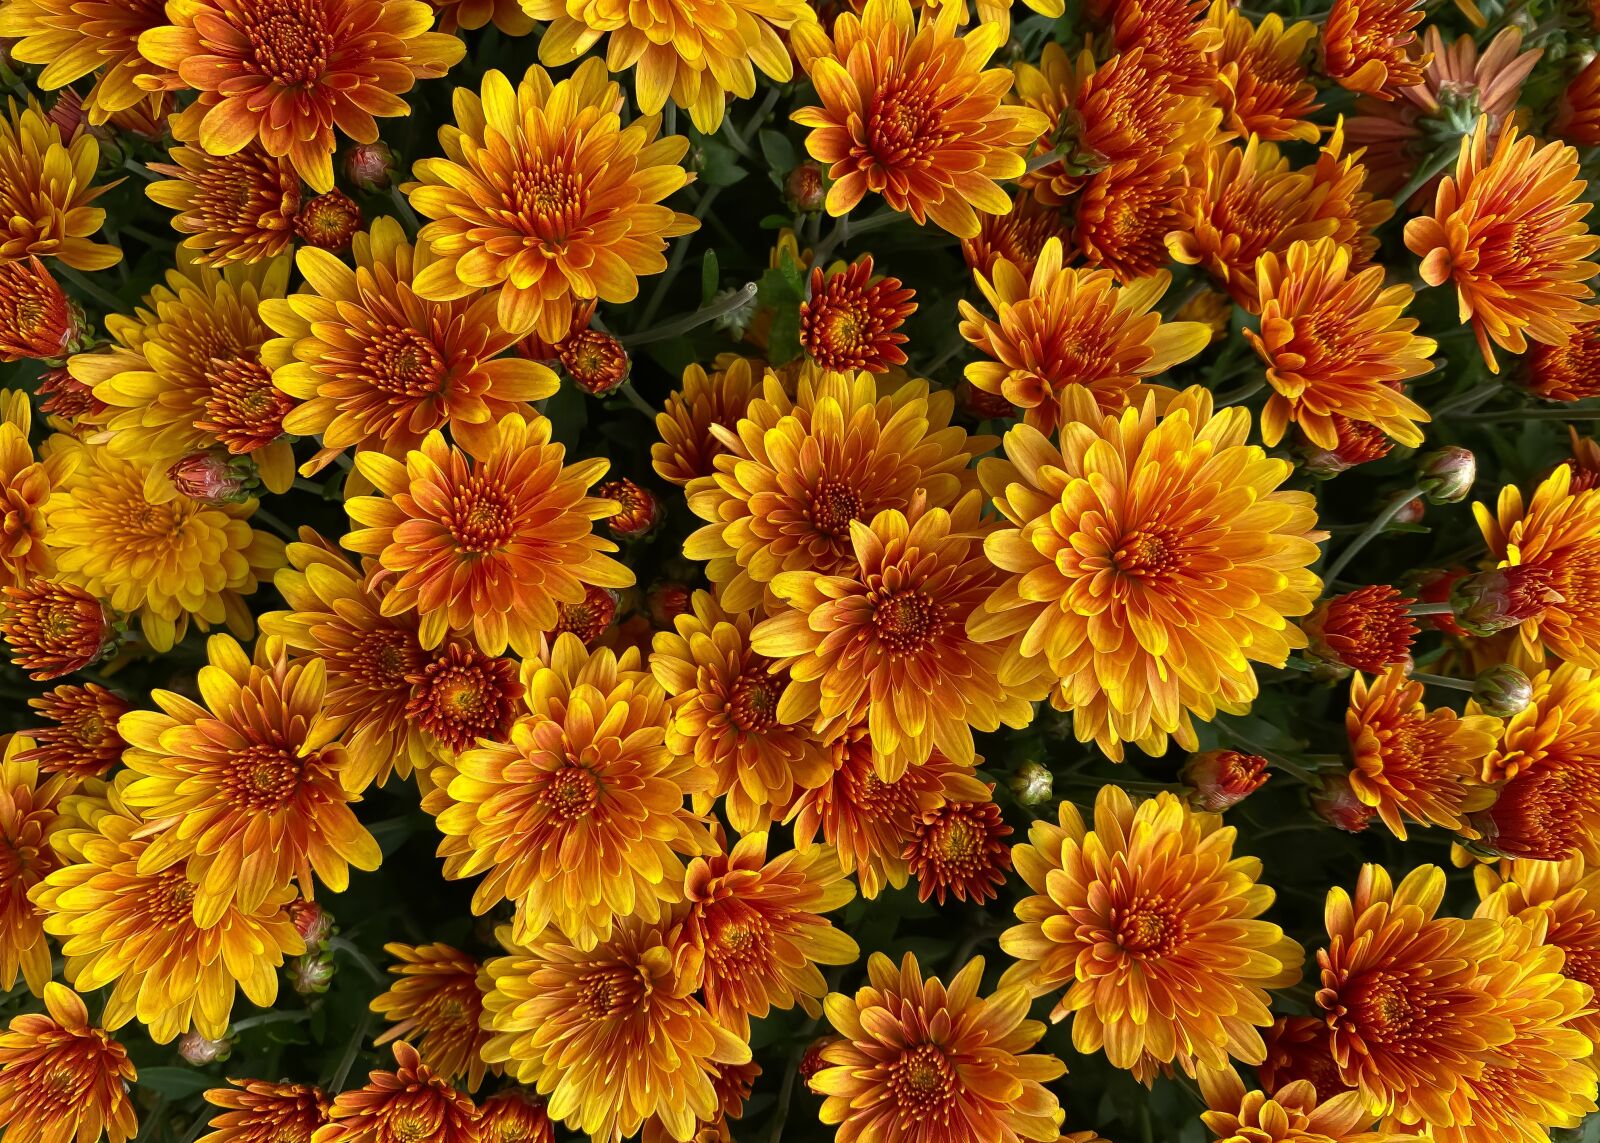 iPhone 11 Pro back triple camera 4.25mm f/1.8 sample photo. Mums, flowers, fall photography